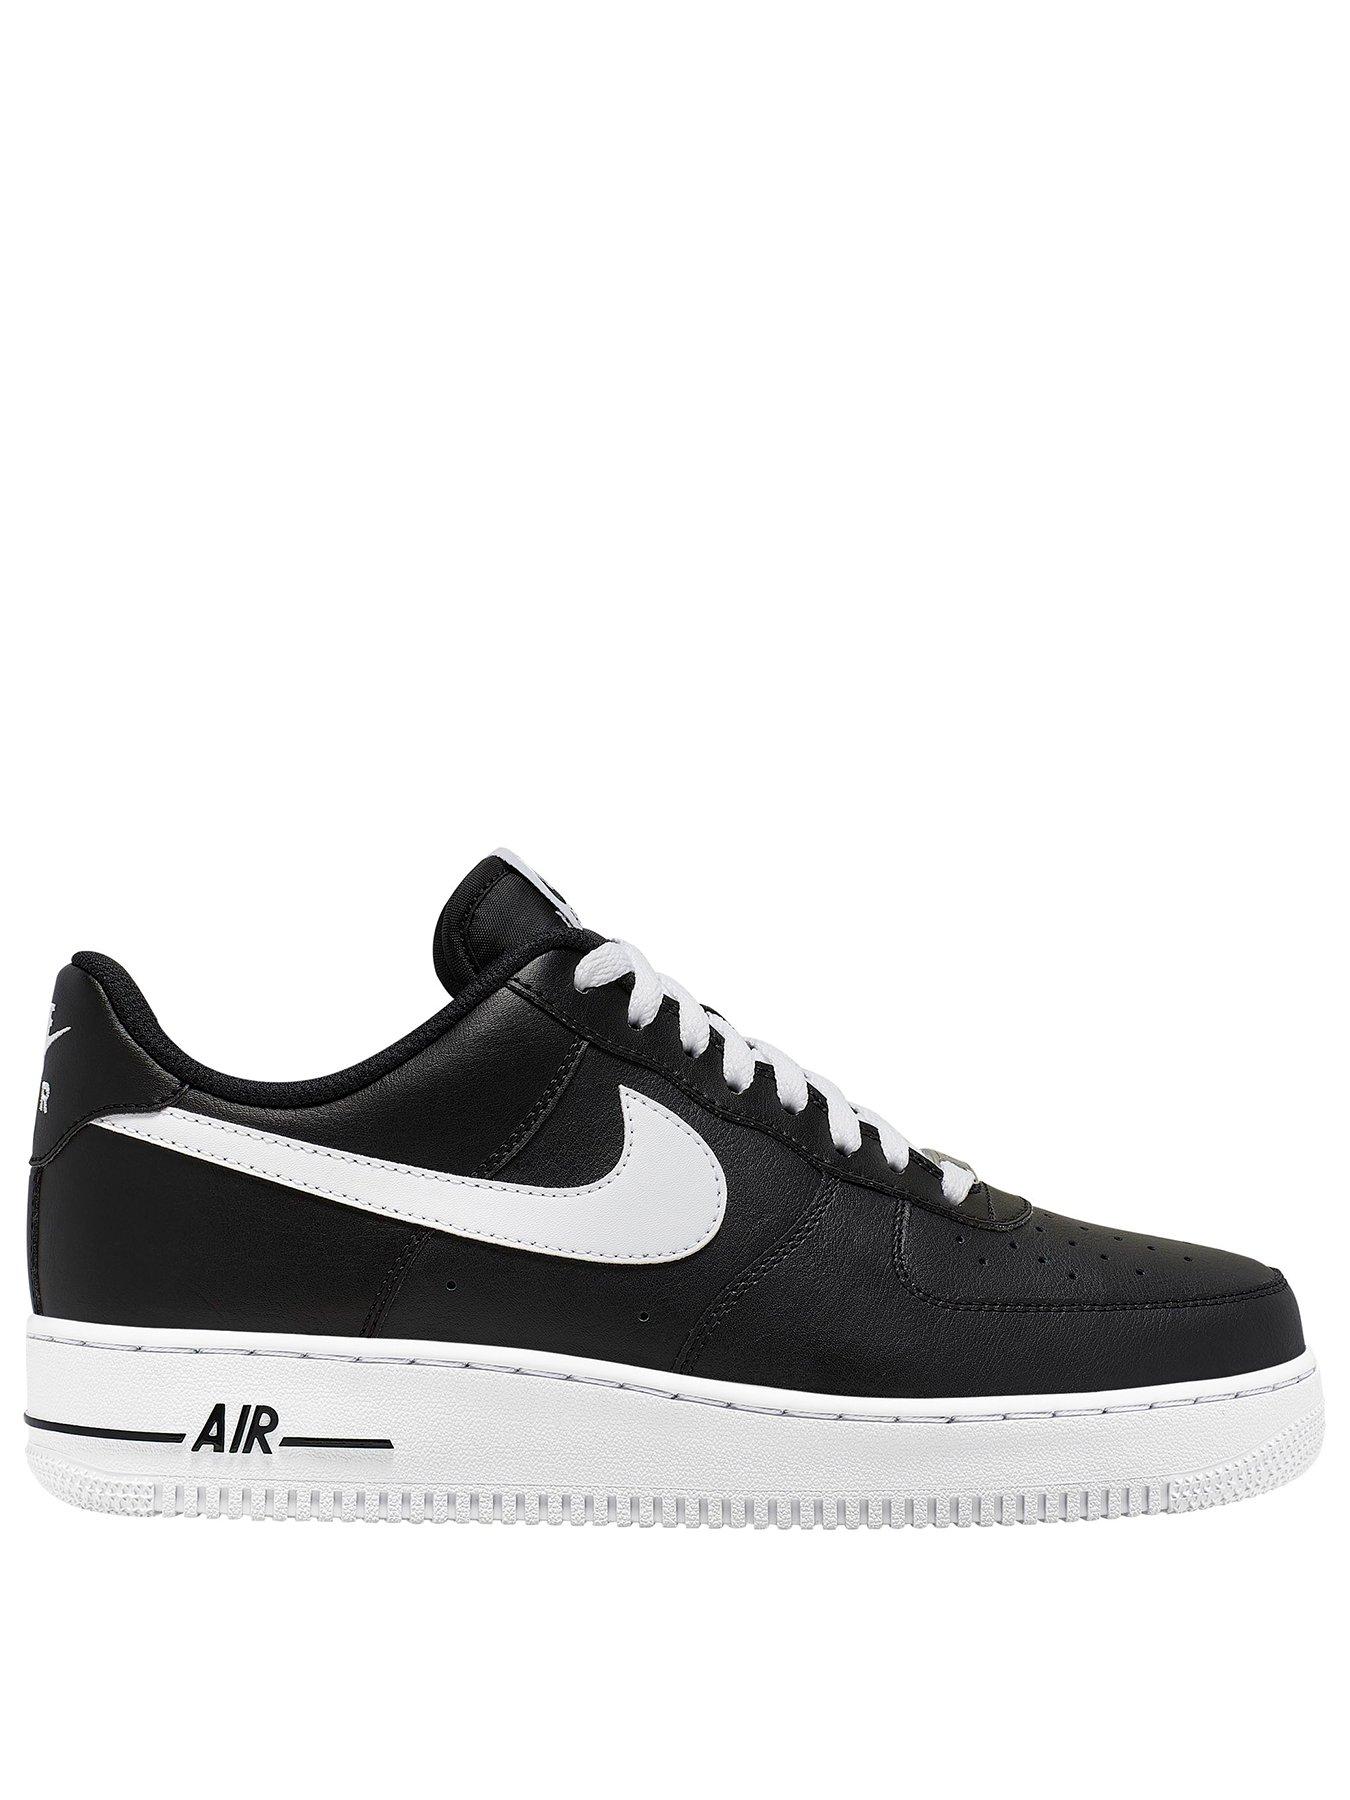 nike air force 1 07 size guide